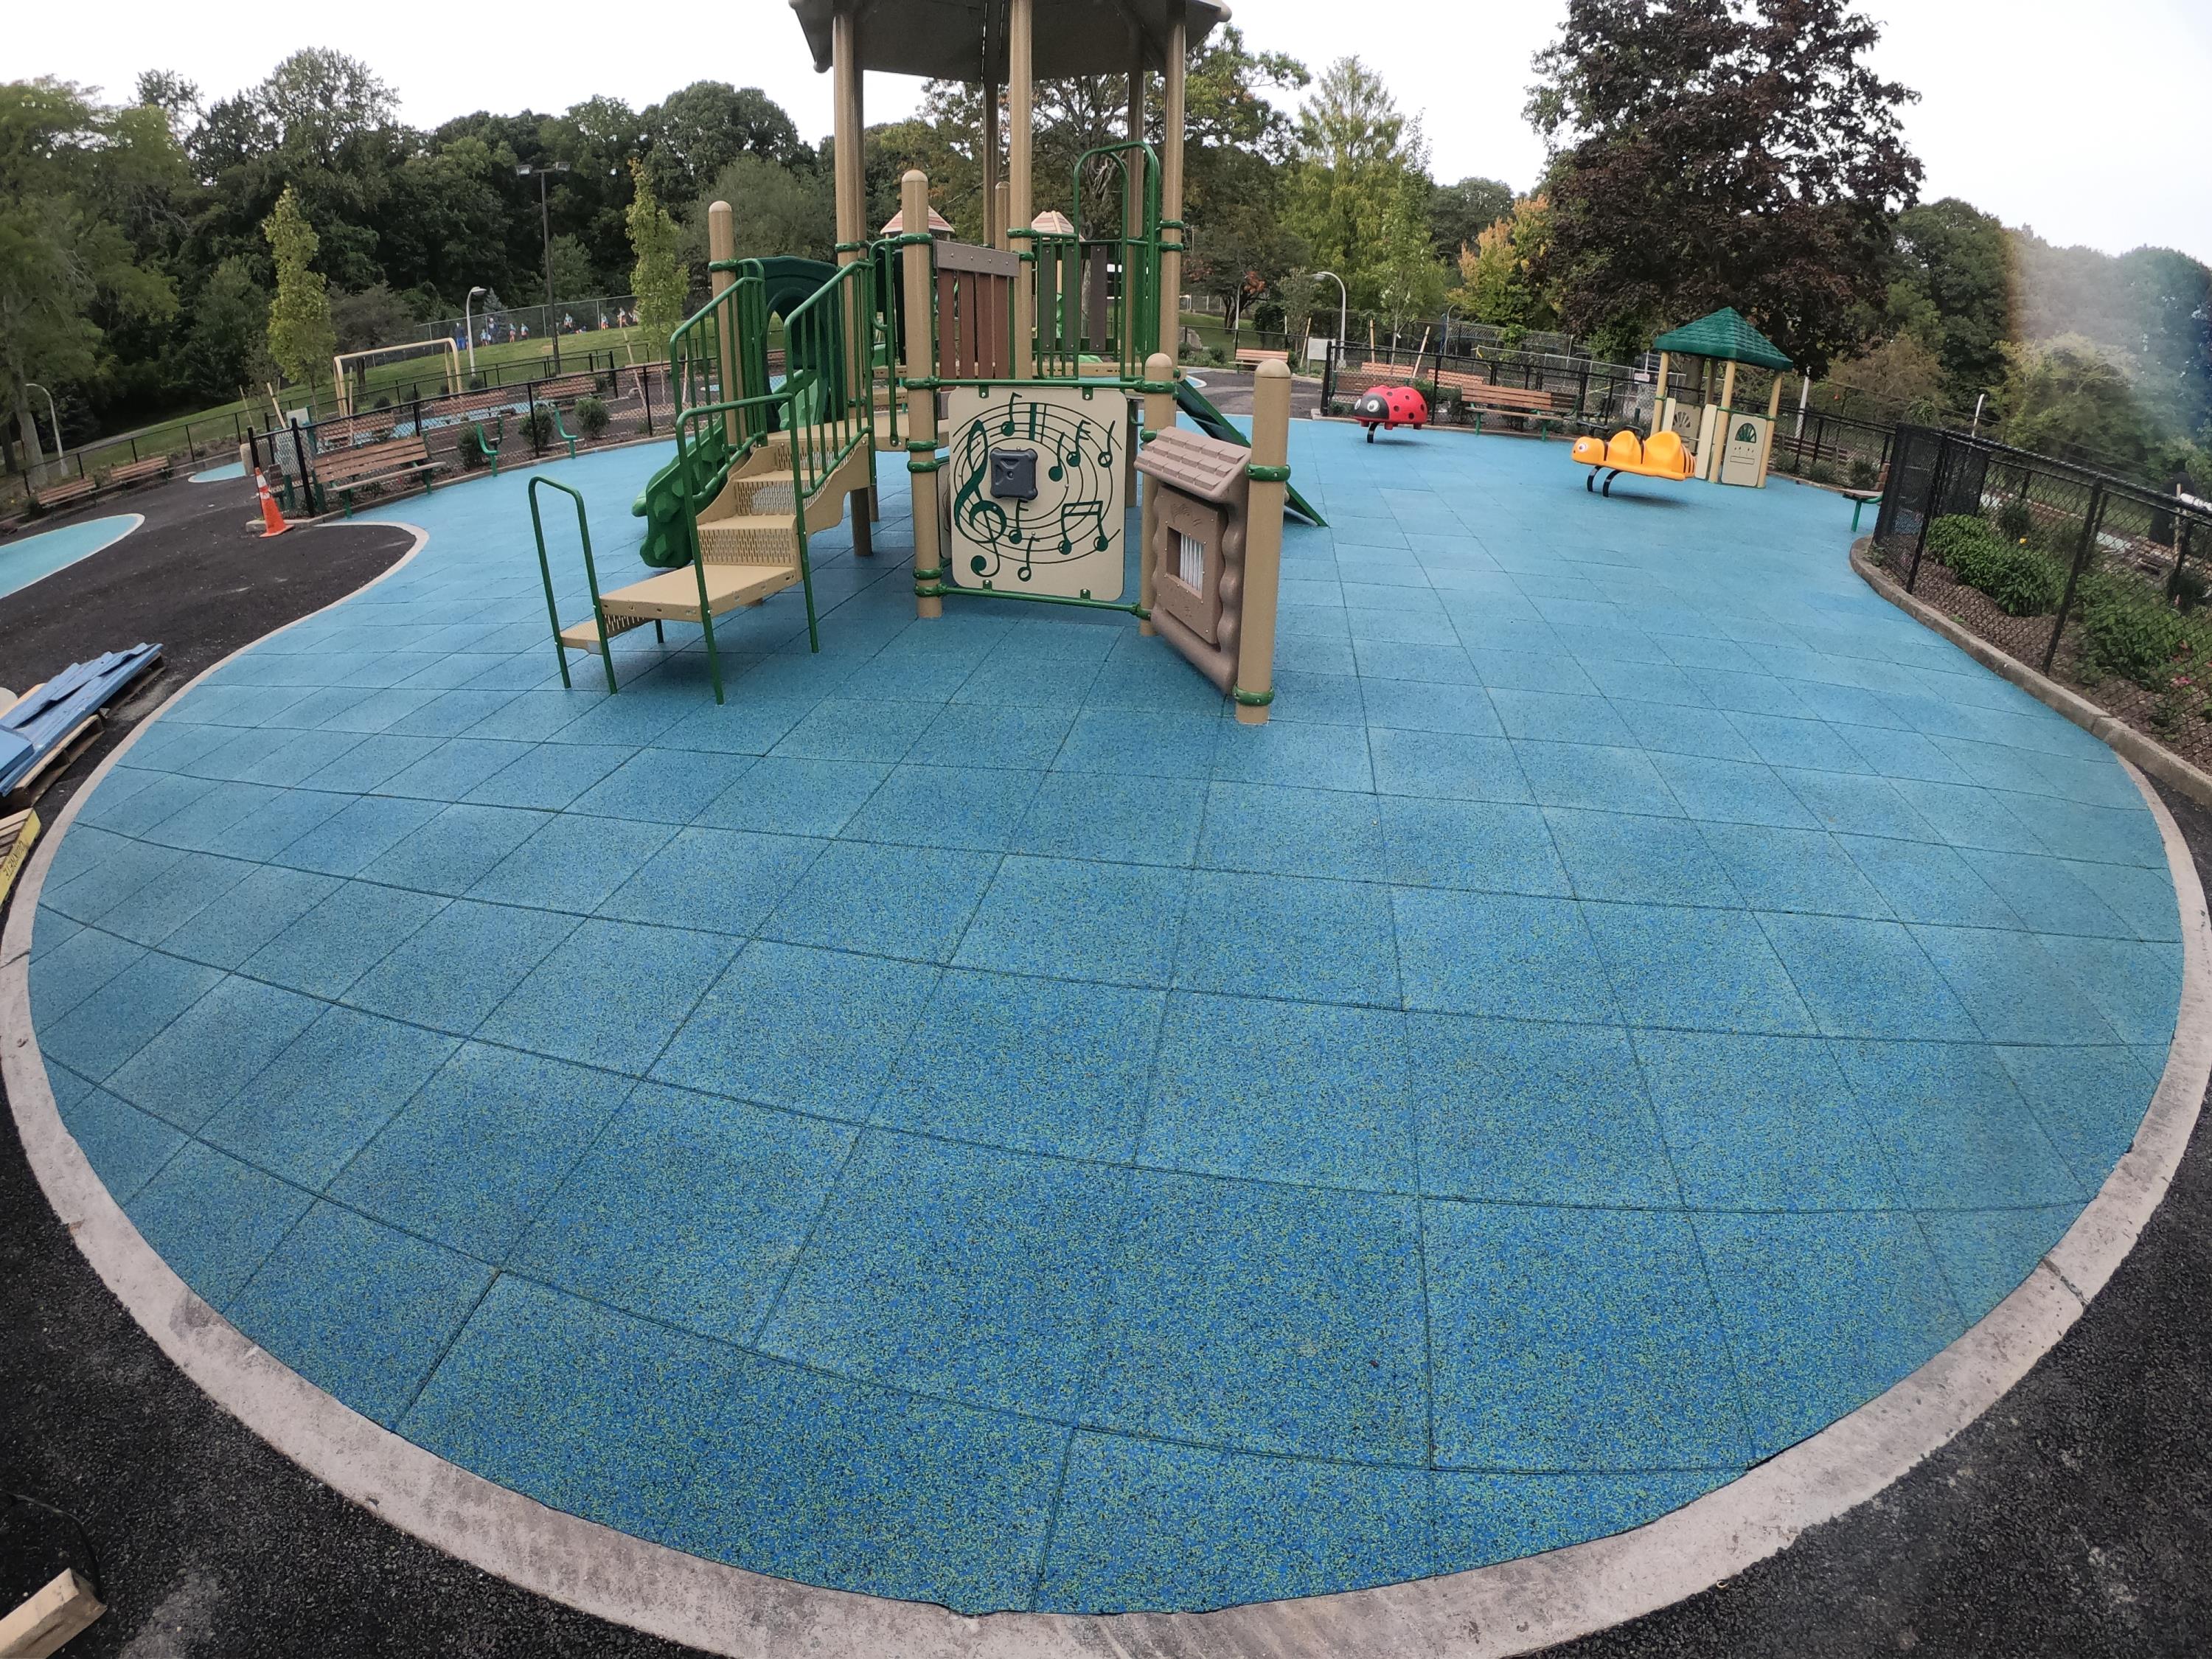 County Park Playground = Using TPV Top Tiles w50% Blue 45% Green 5% Black x